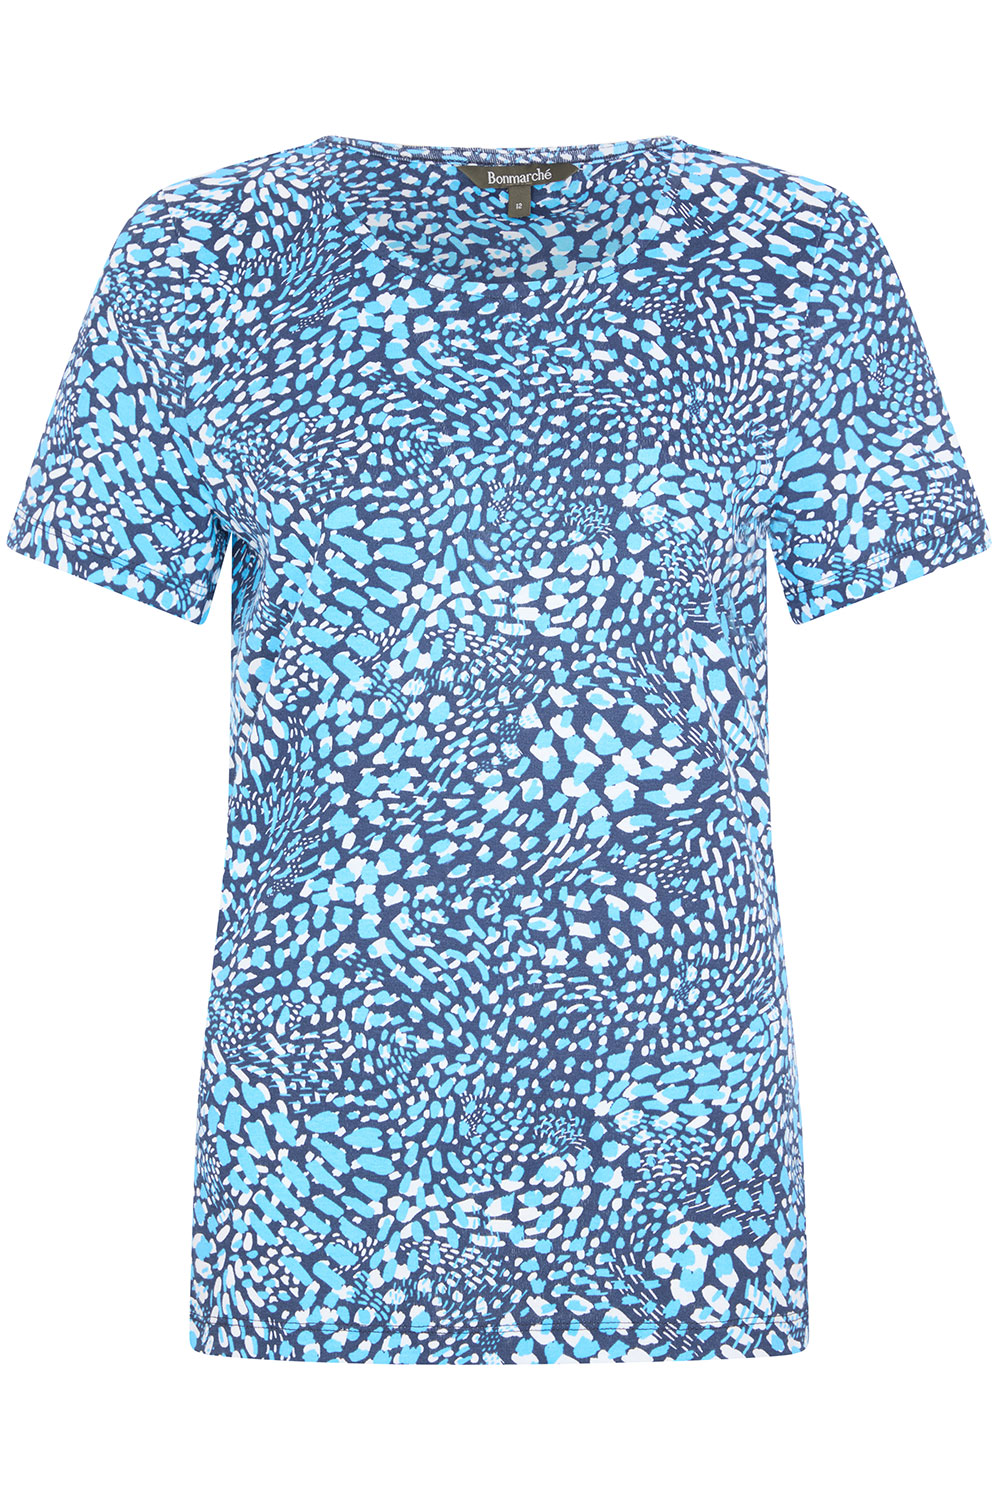 Short Sleeve Abstract Print Scoop Neck T-Shirt | Bonmarché